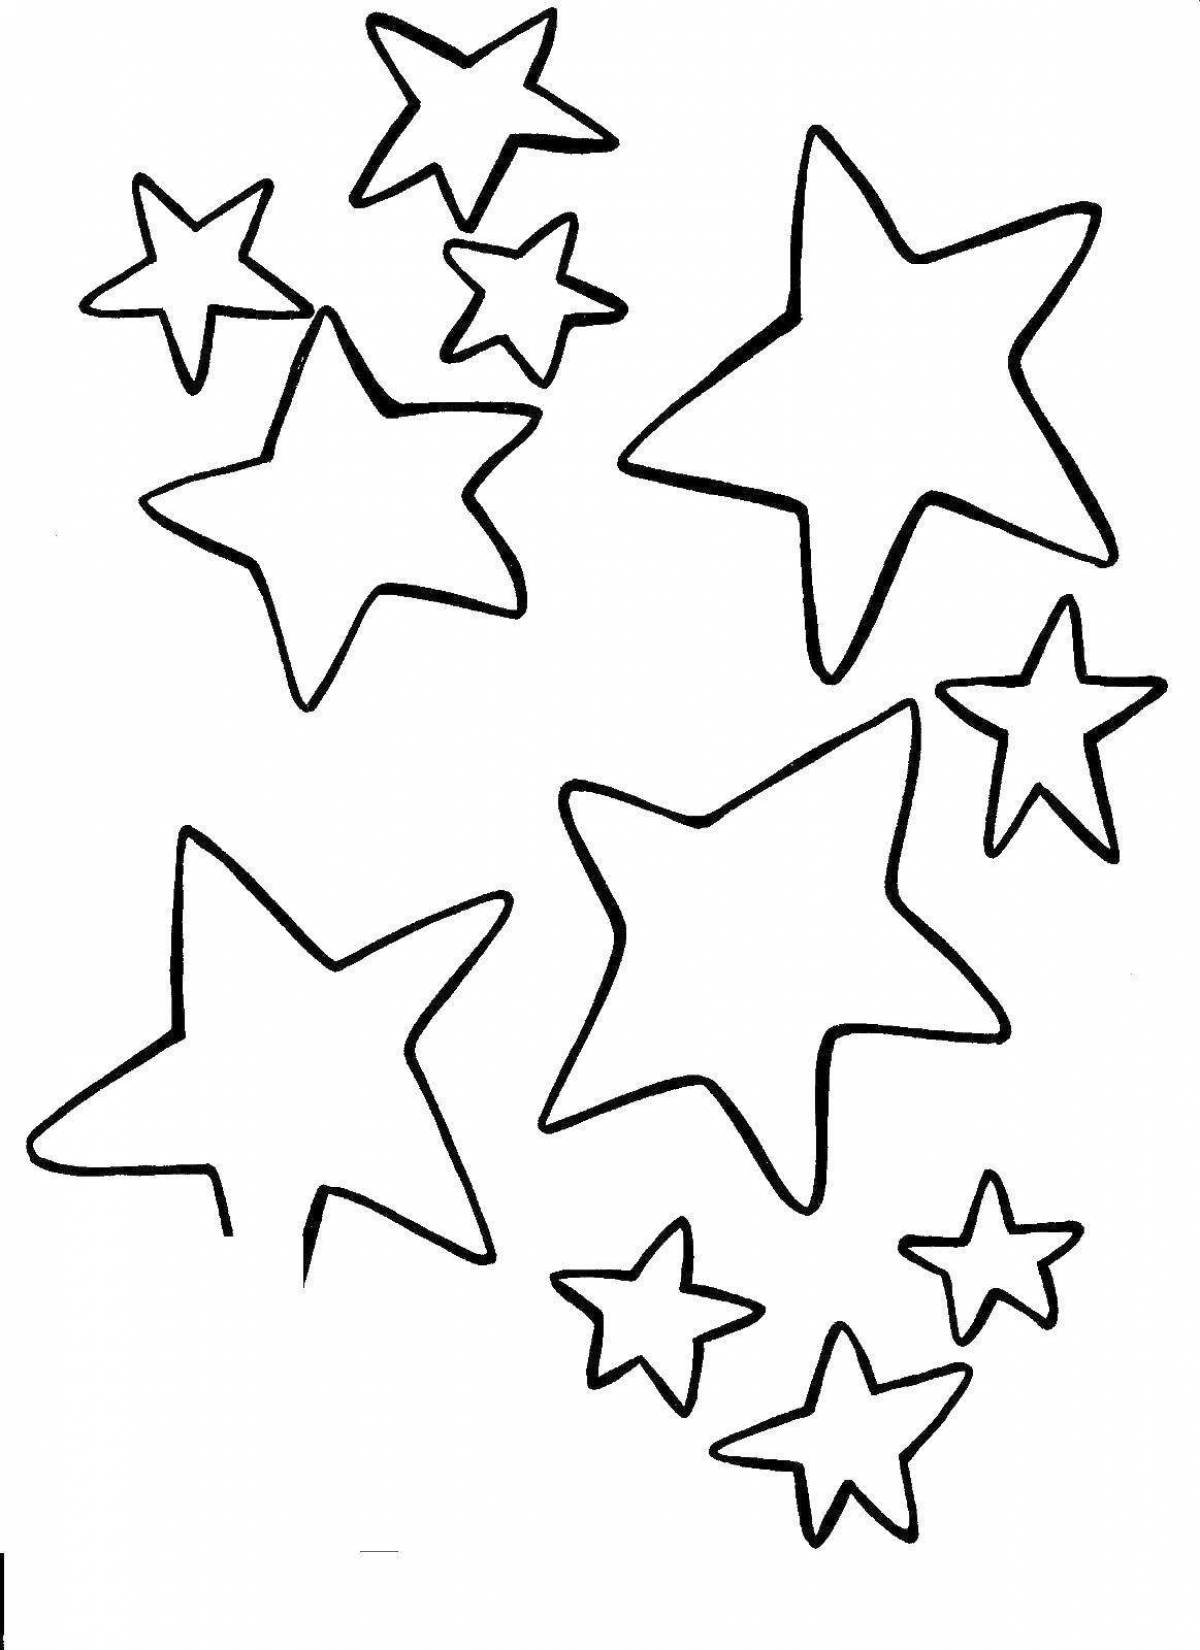 Glowing star coloring book for kids